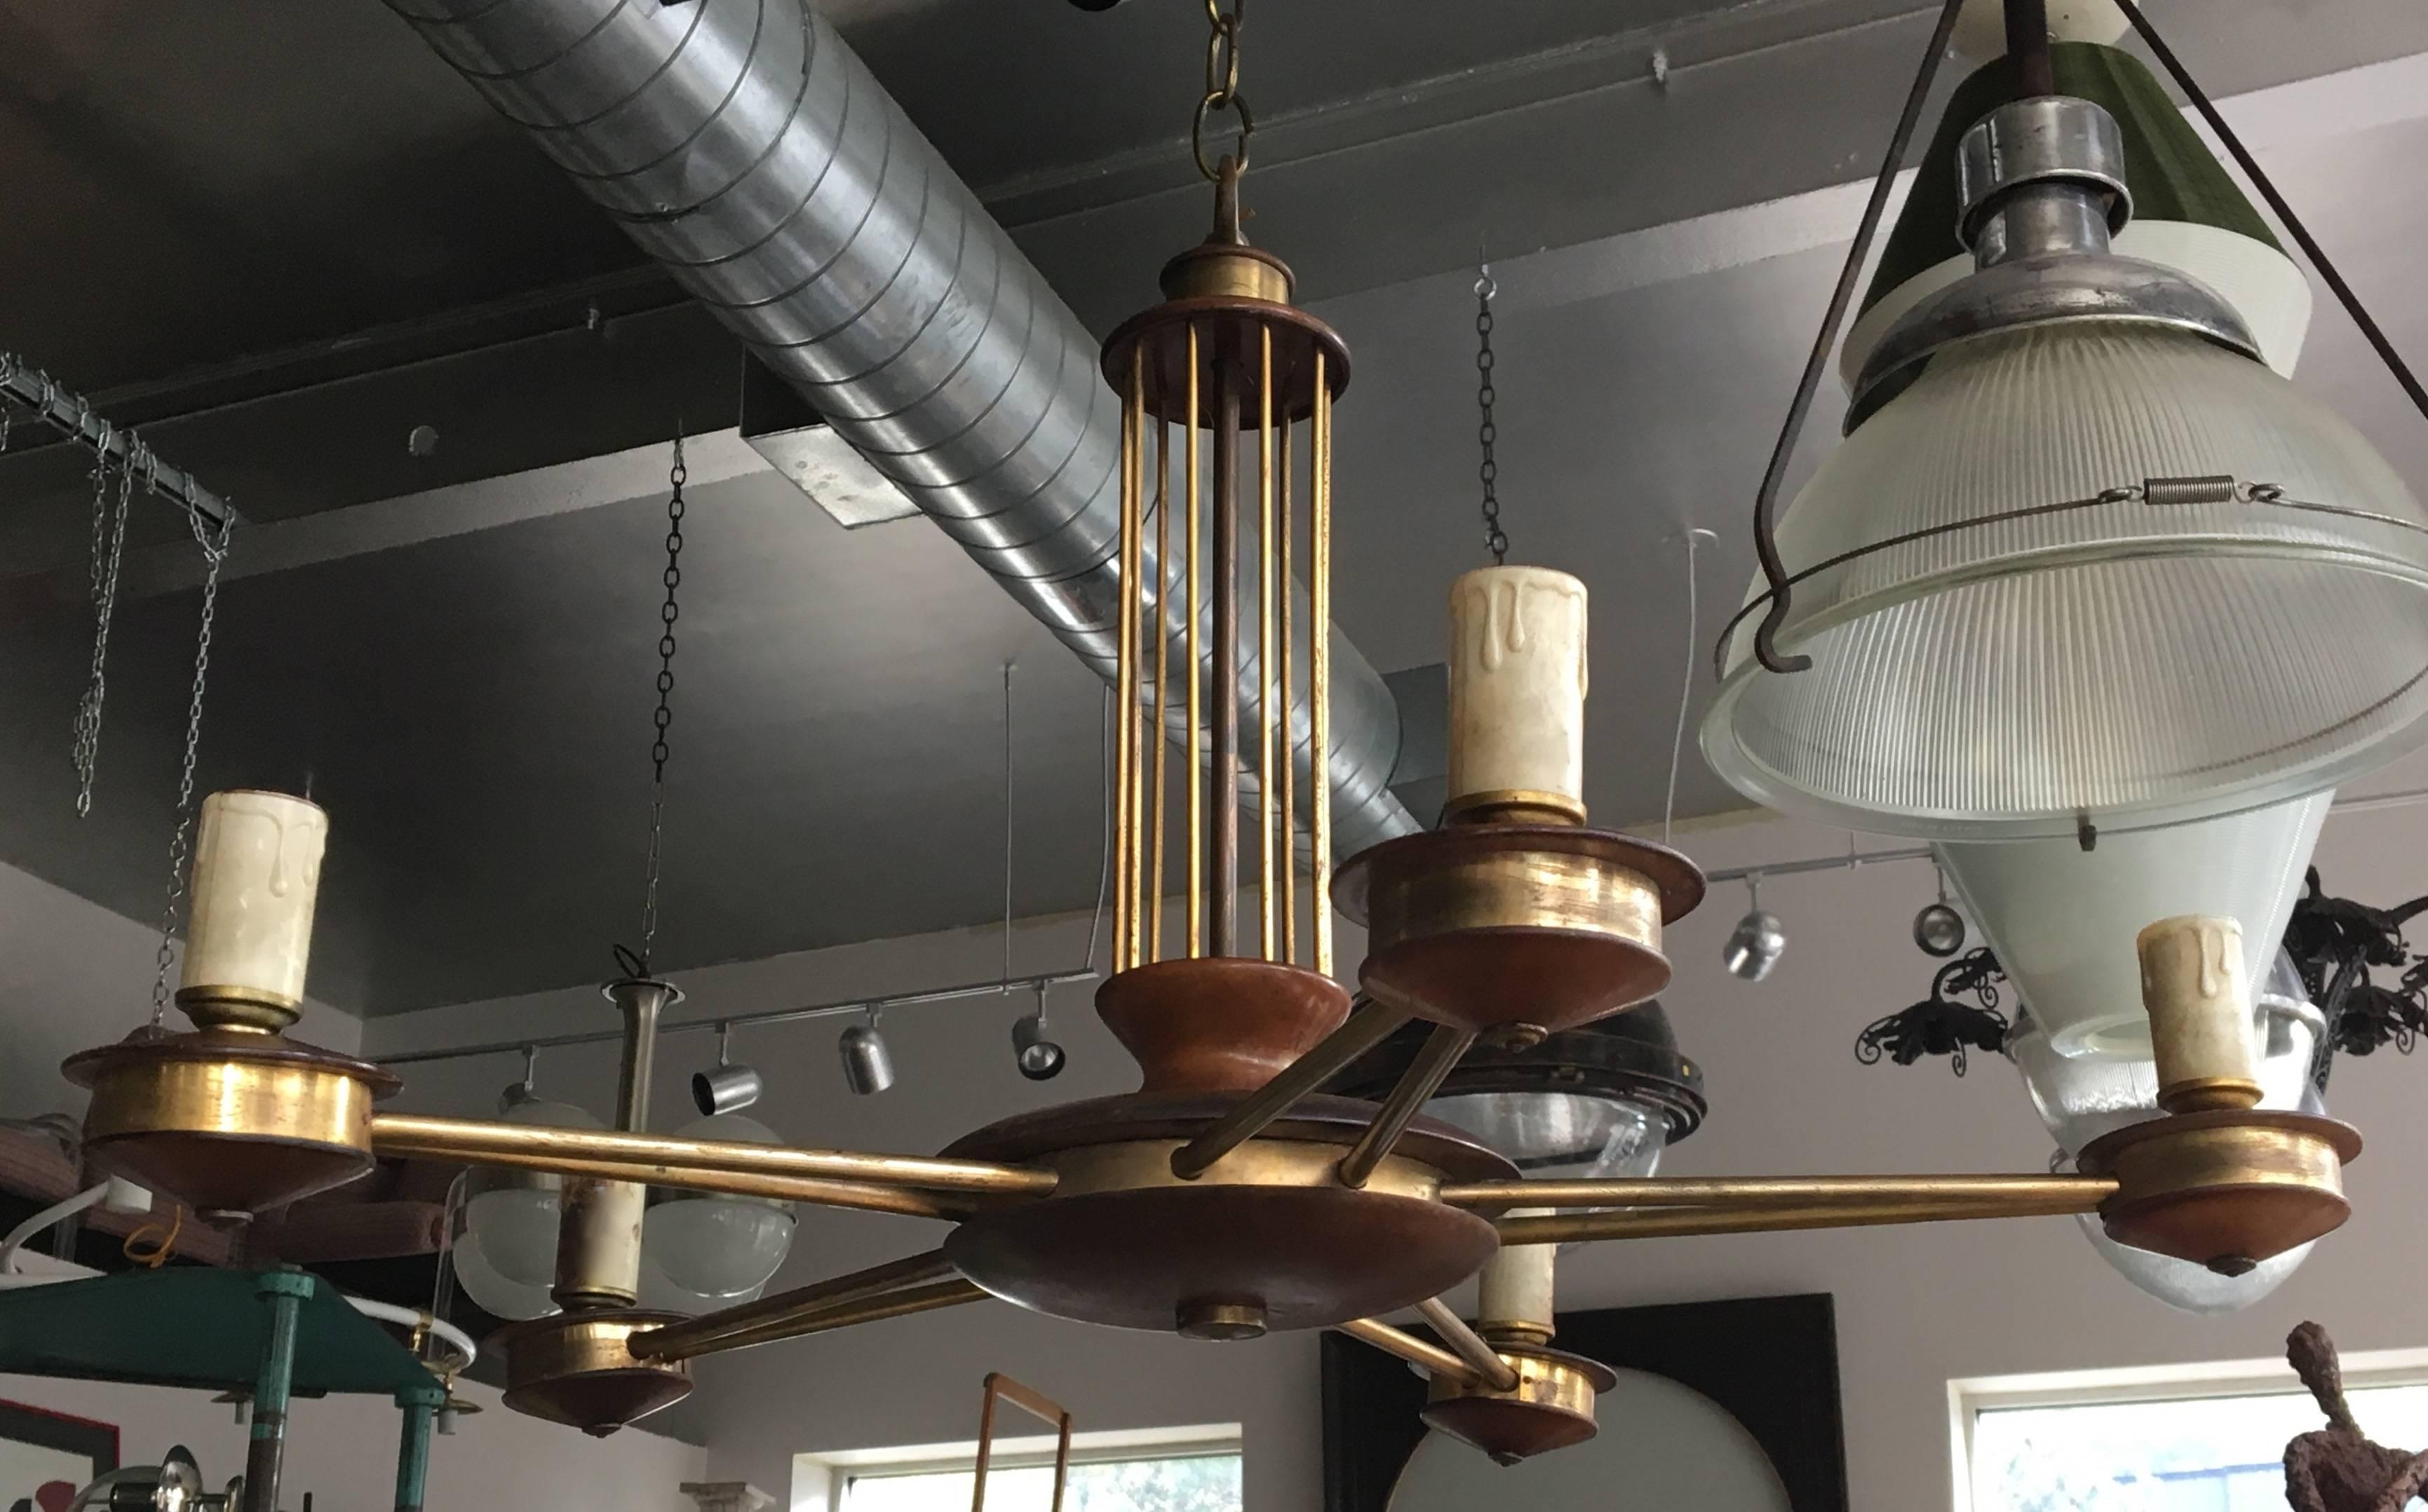 Charming Scandinavian Modern wood and brass chandelier of flush-mounted light, all new wiring included.
Avantgarden Ltd. cultivates unexpected and exceptional lighting, furniture and design. To view items in person please visit our showroom in Pound